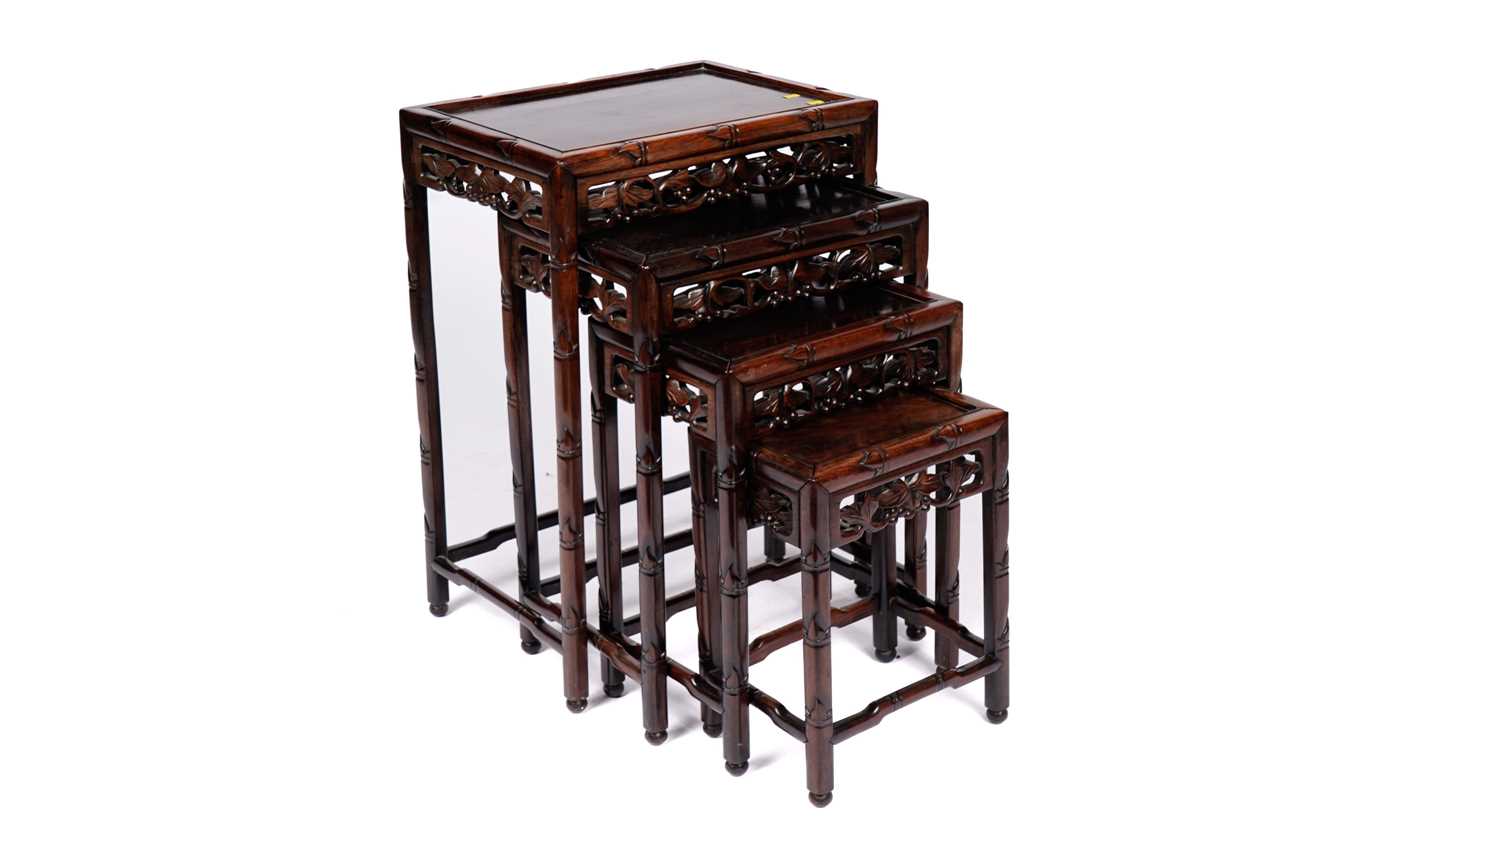 A Chinese quartetto nest of tables